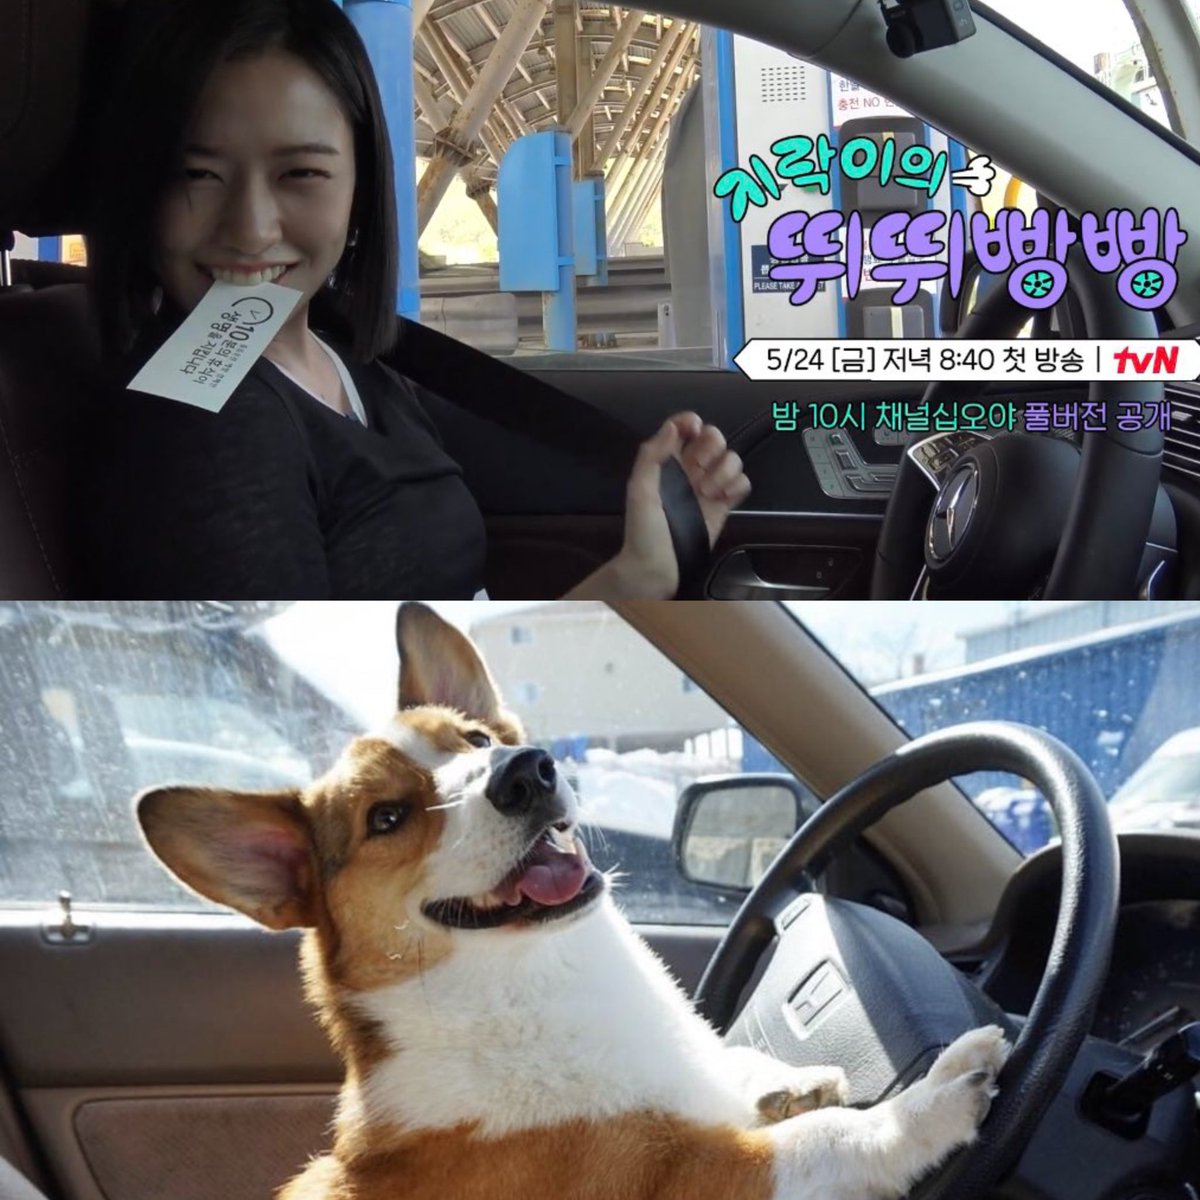 In case you're looking for an excited puppy driving her own car 😂🫳🏻🐶

#이거안유진